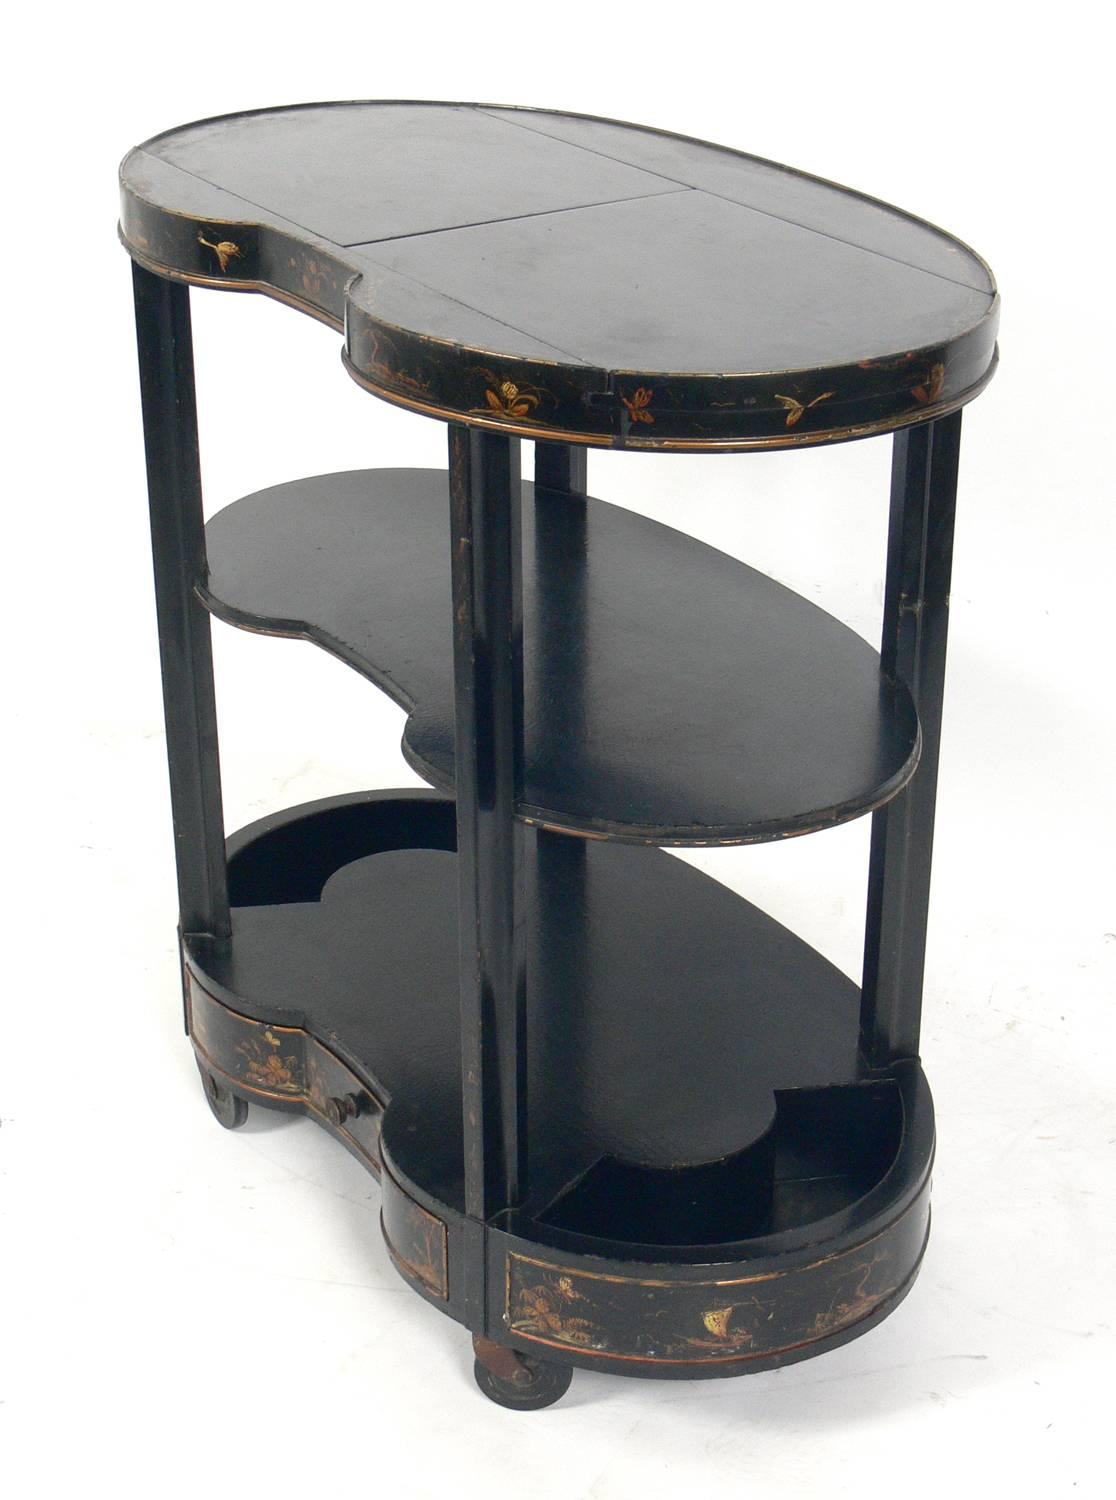 Elegant Chinoiserie bar cart, American, circa 1940s. Retains original black lacquer finish with subtle chinoiserie decoration and original copper clad serving area that is revealed when the sliding top opens.